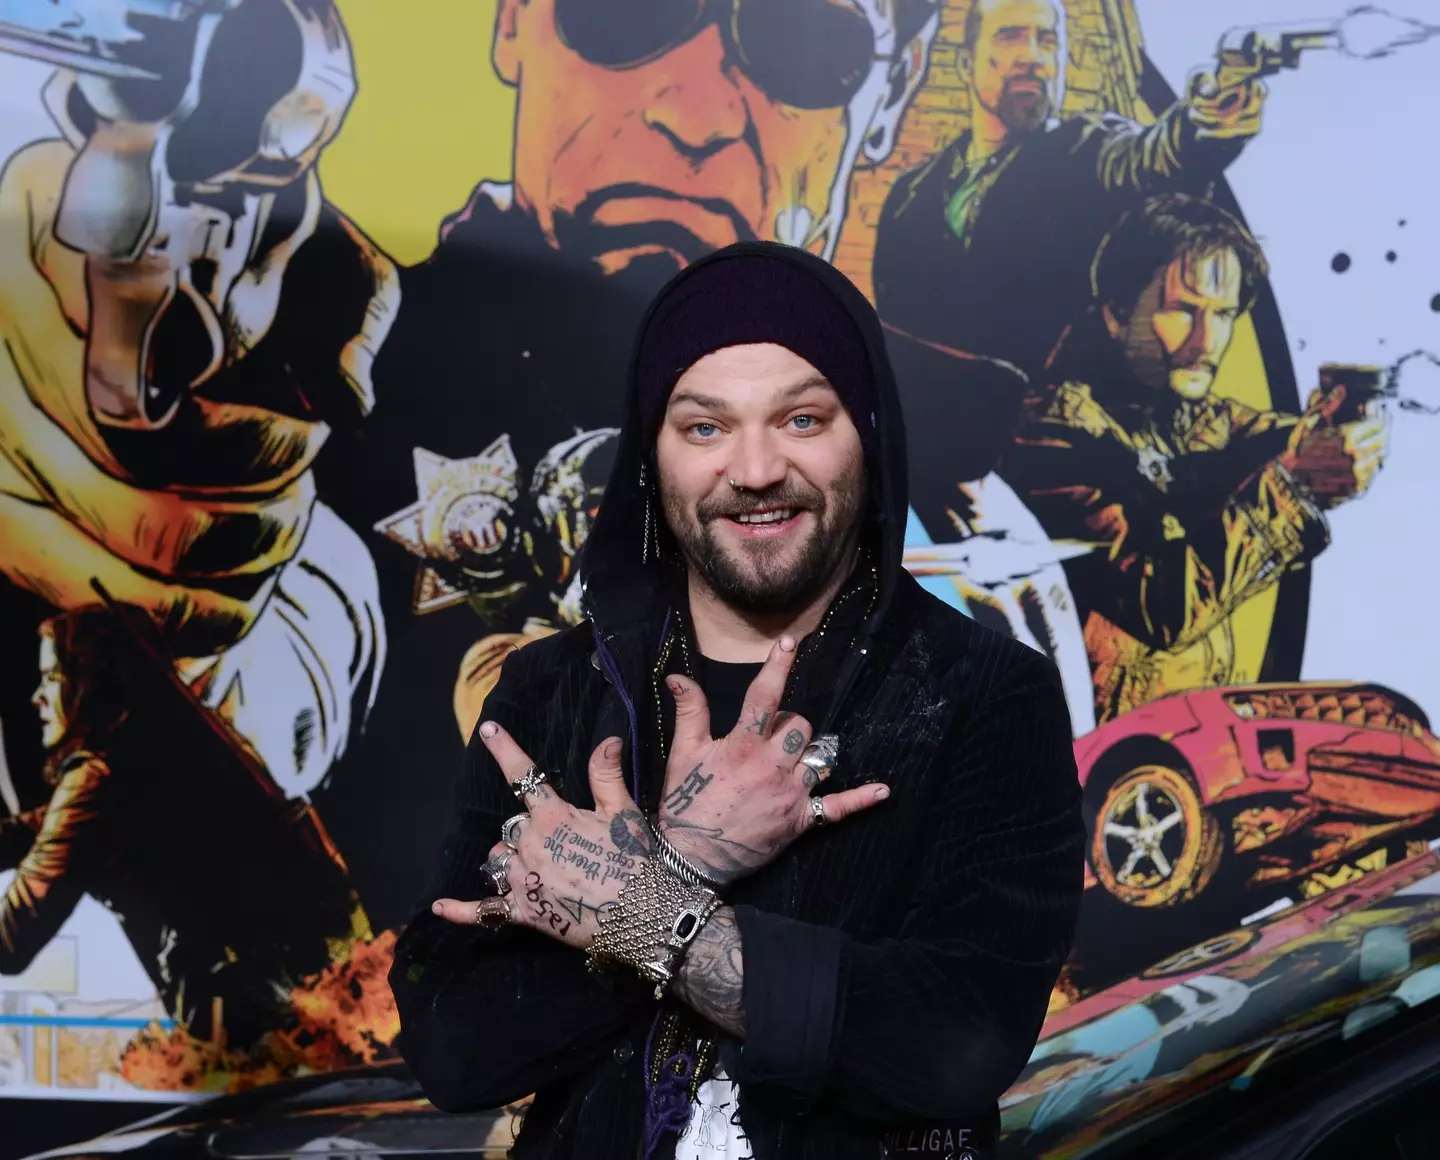 It appears Bam Margera has a new AA sponsor.